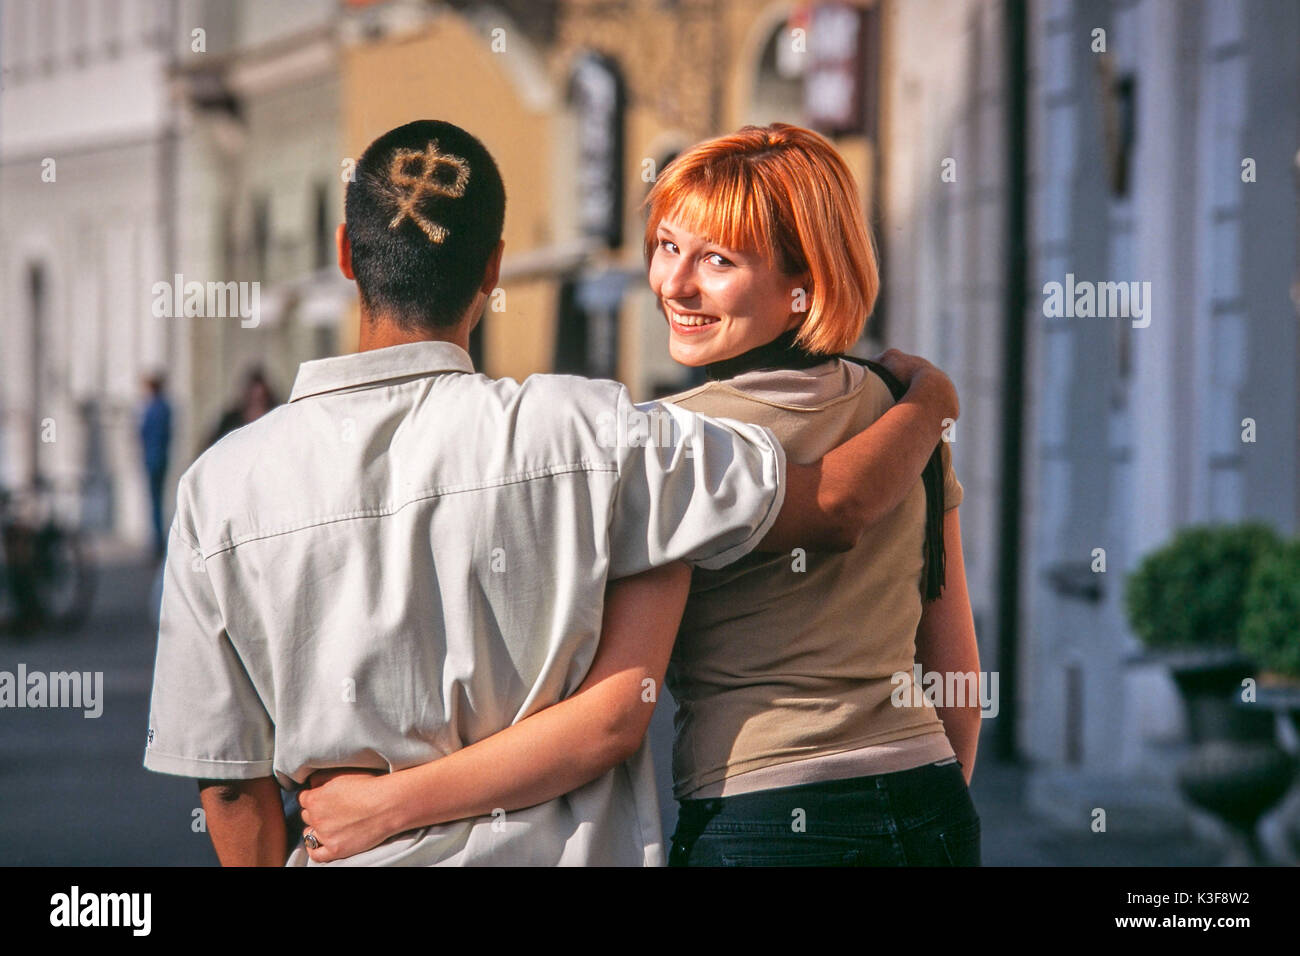 Couple from the back. Woman turns round and looks over the shoulder. Stock Photo